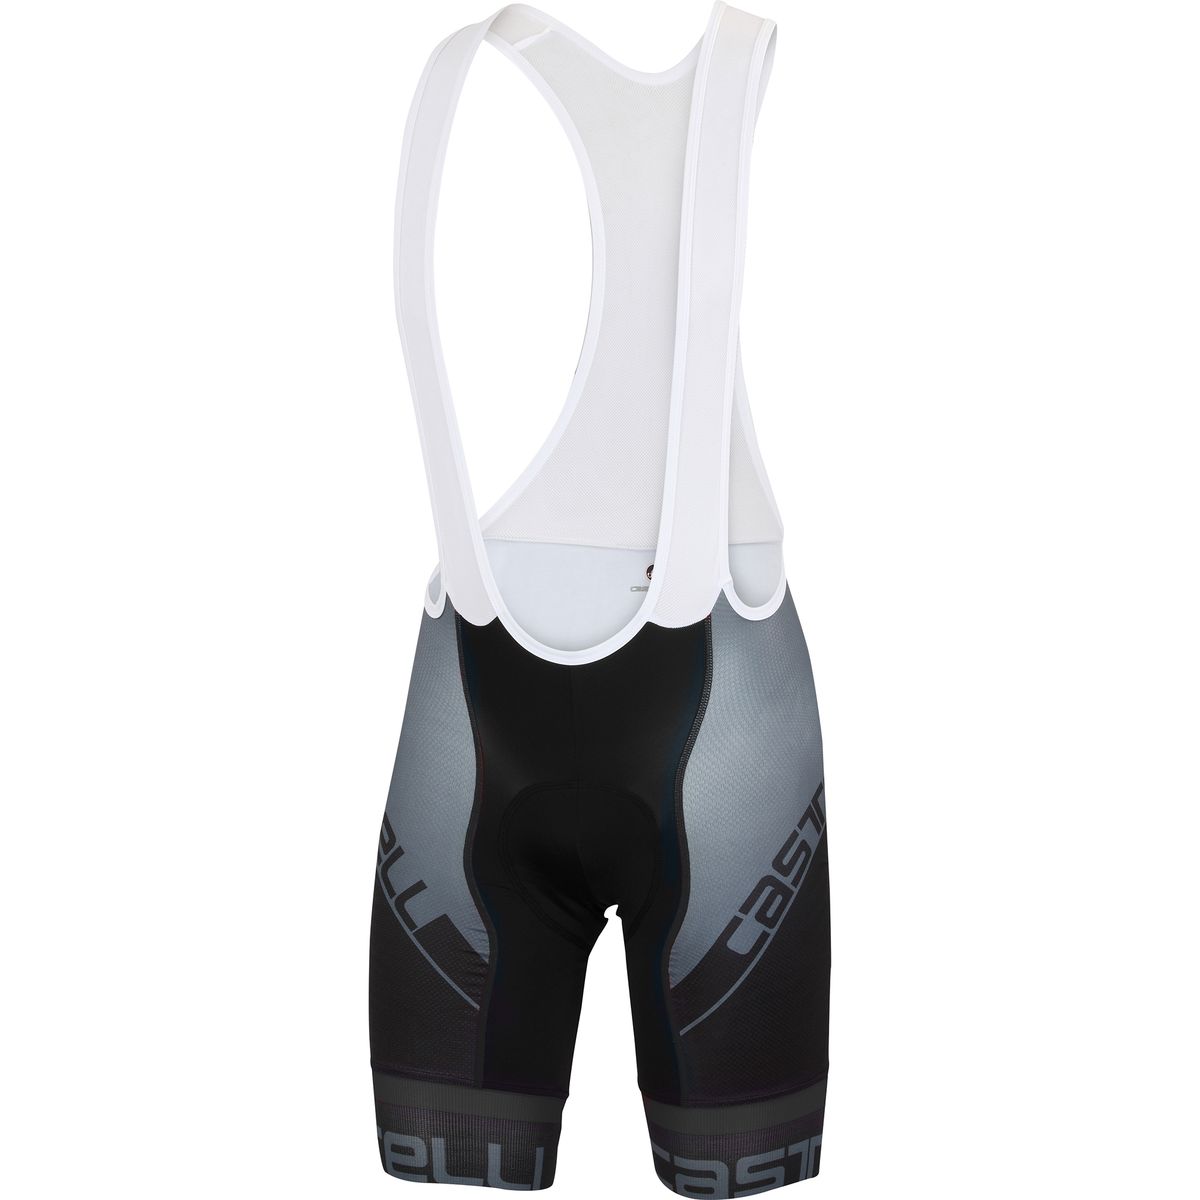 Castelli Volo Men's Cycling Bib Shorts SEE Video 3 Color Options 